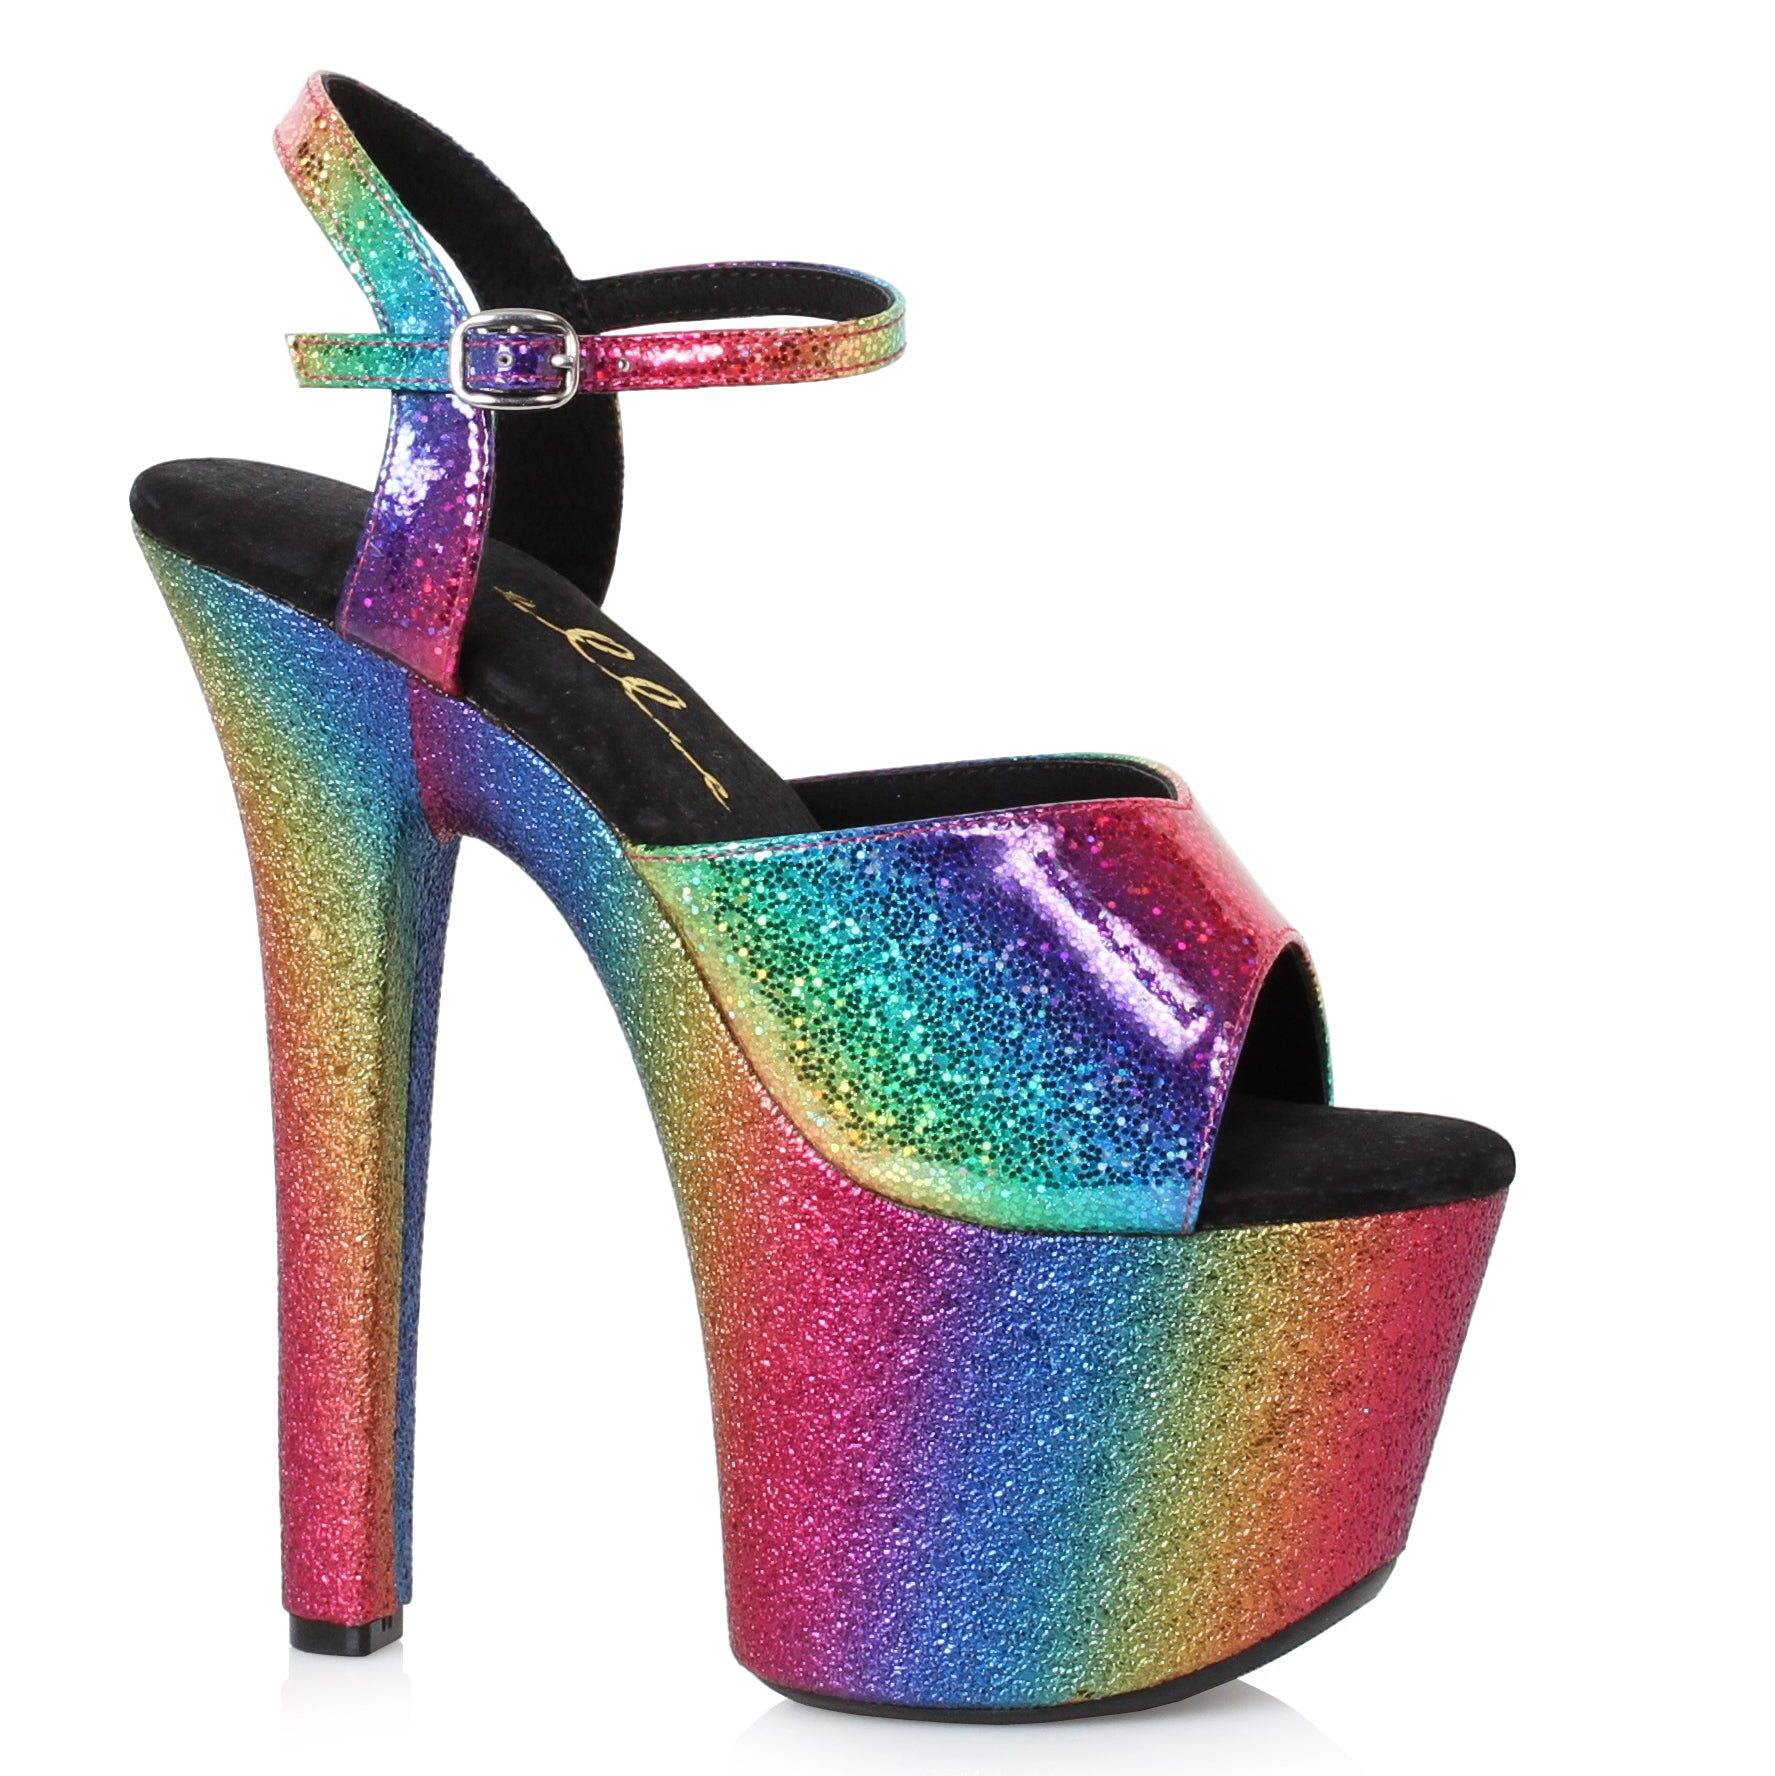 7 Pointed Stiletto With Rainbow Sandal